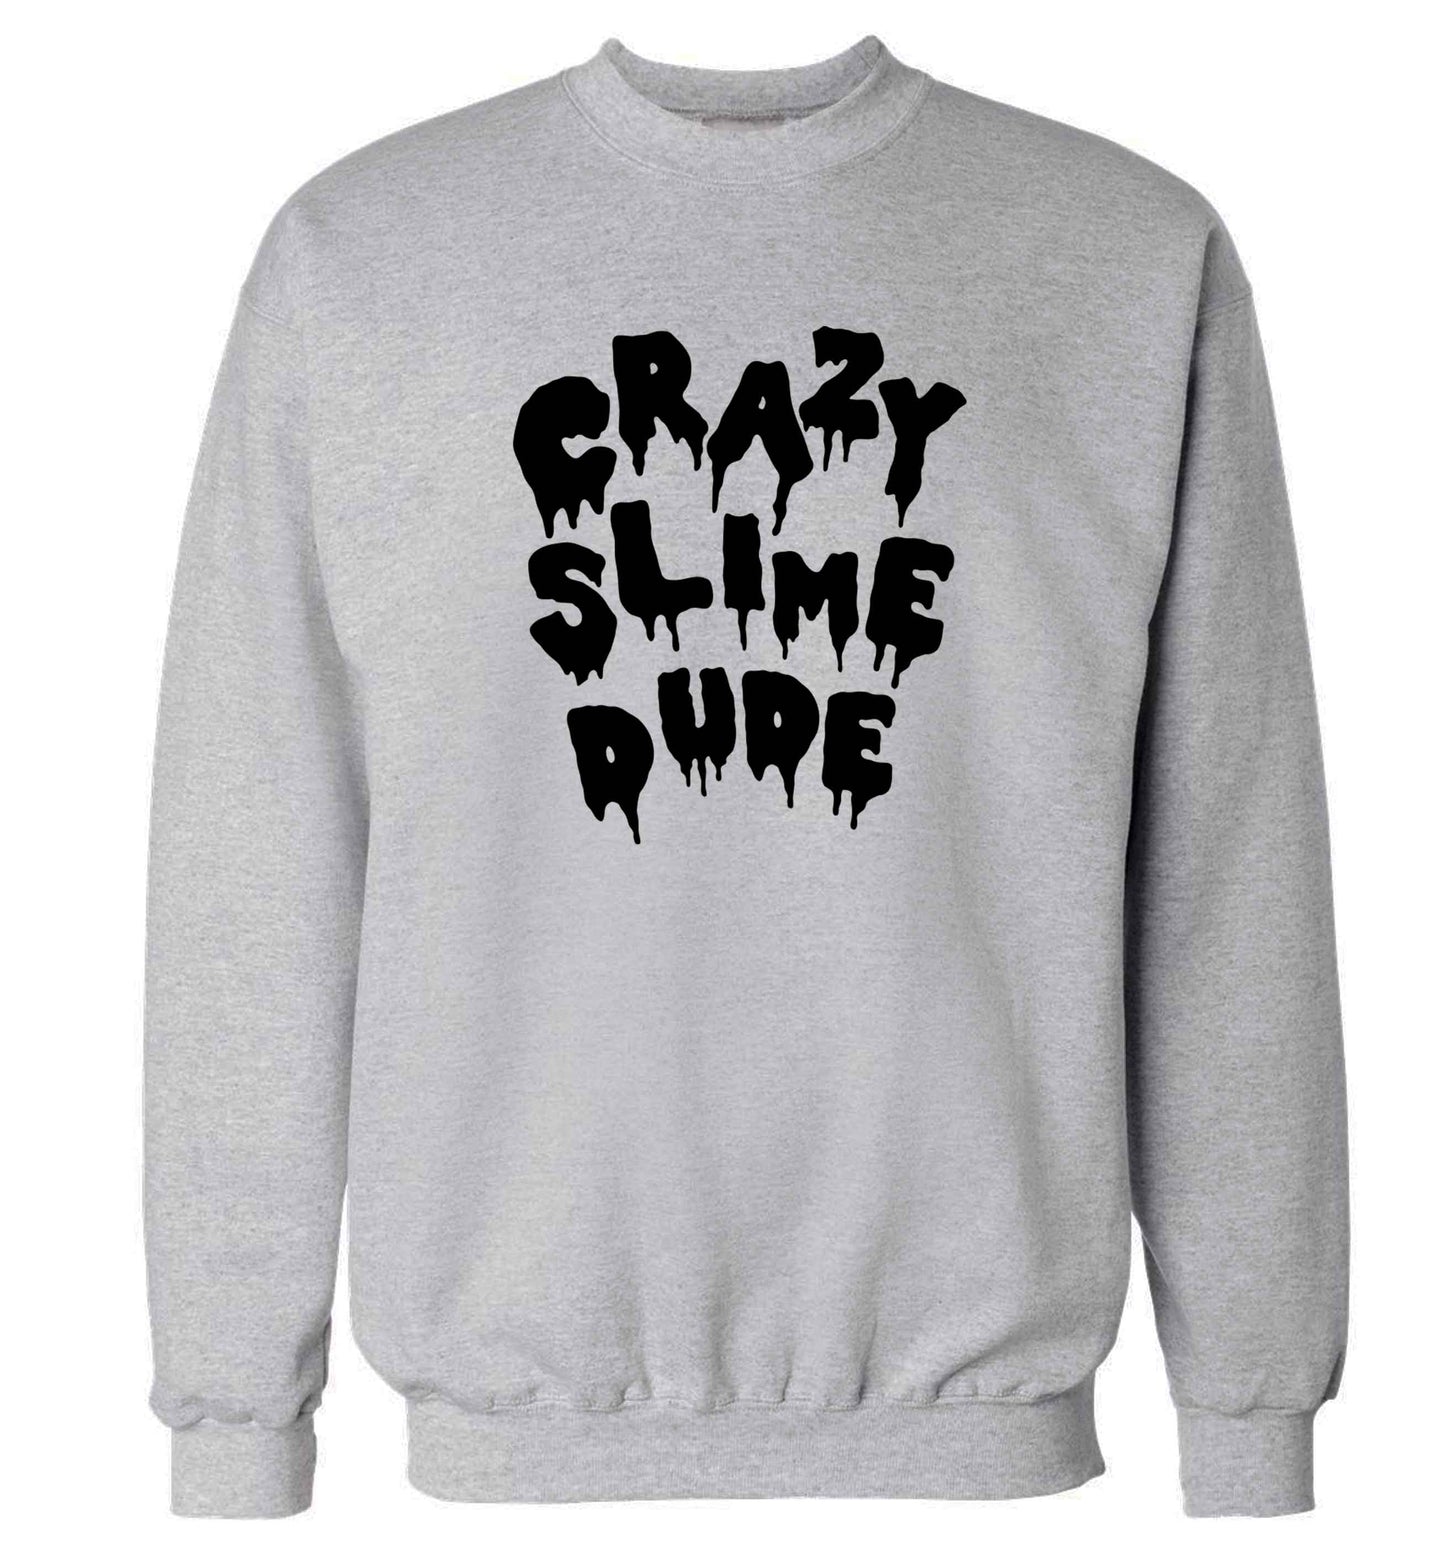 Crazy slime dude adult's unisex grey sweater 2XL